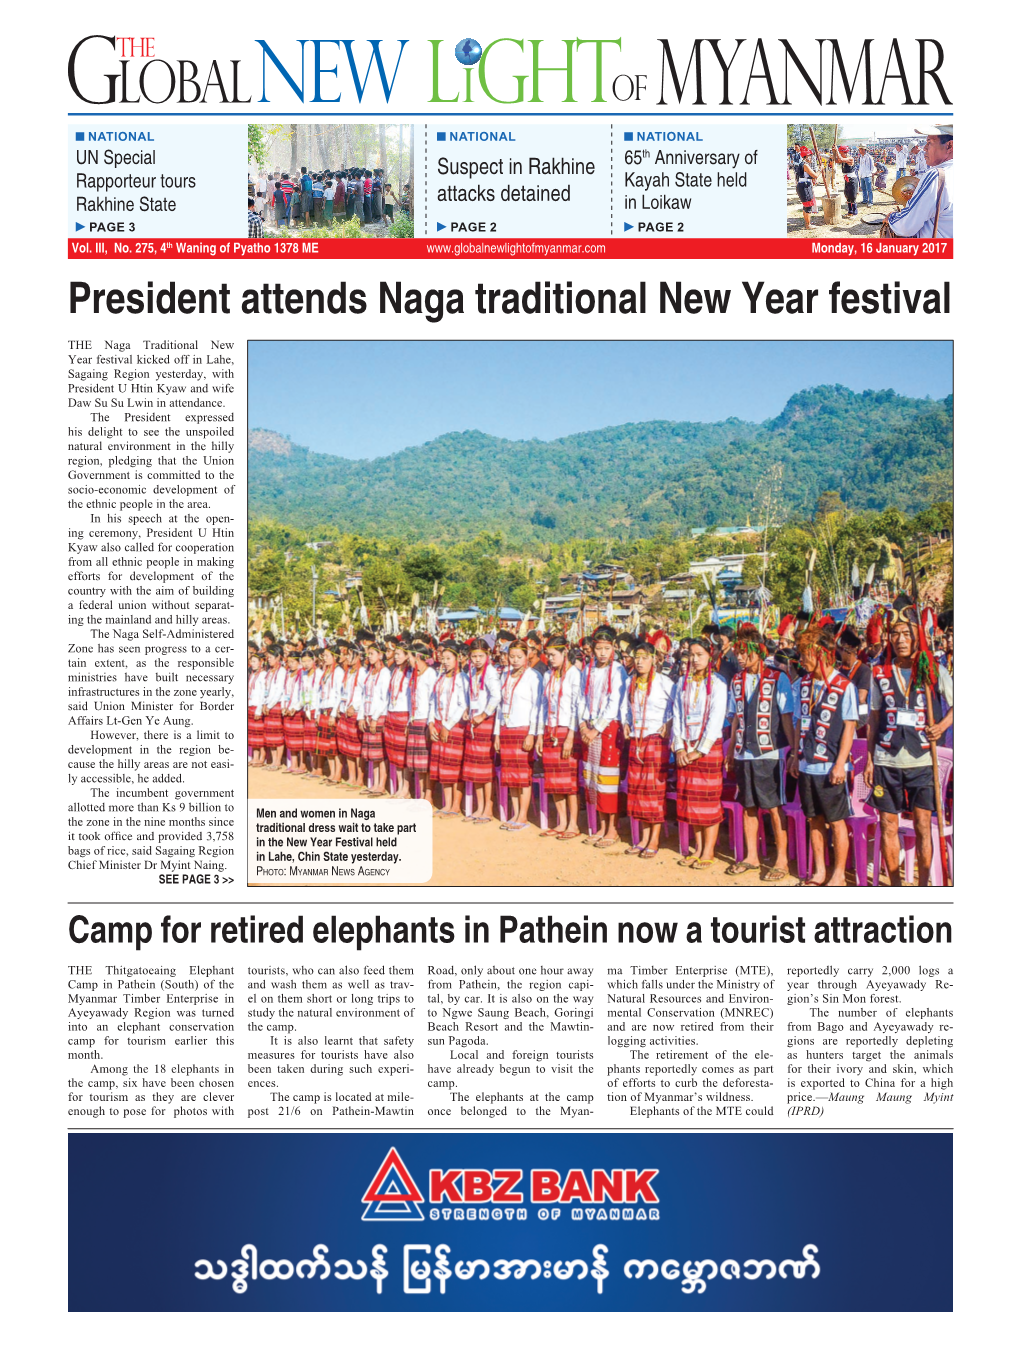 President Attends Naga Traditional New Year Festival